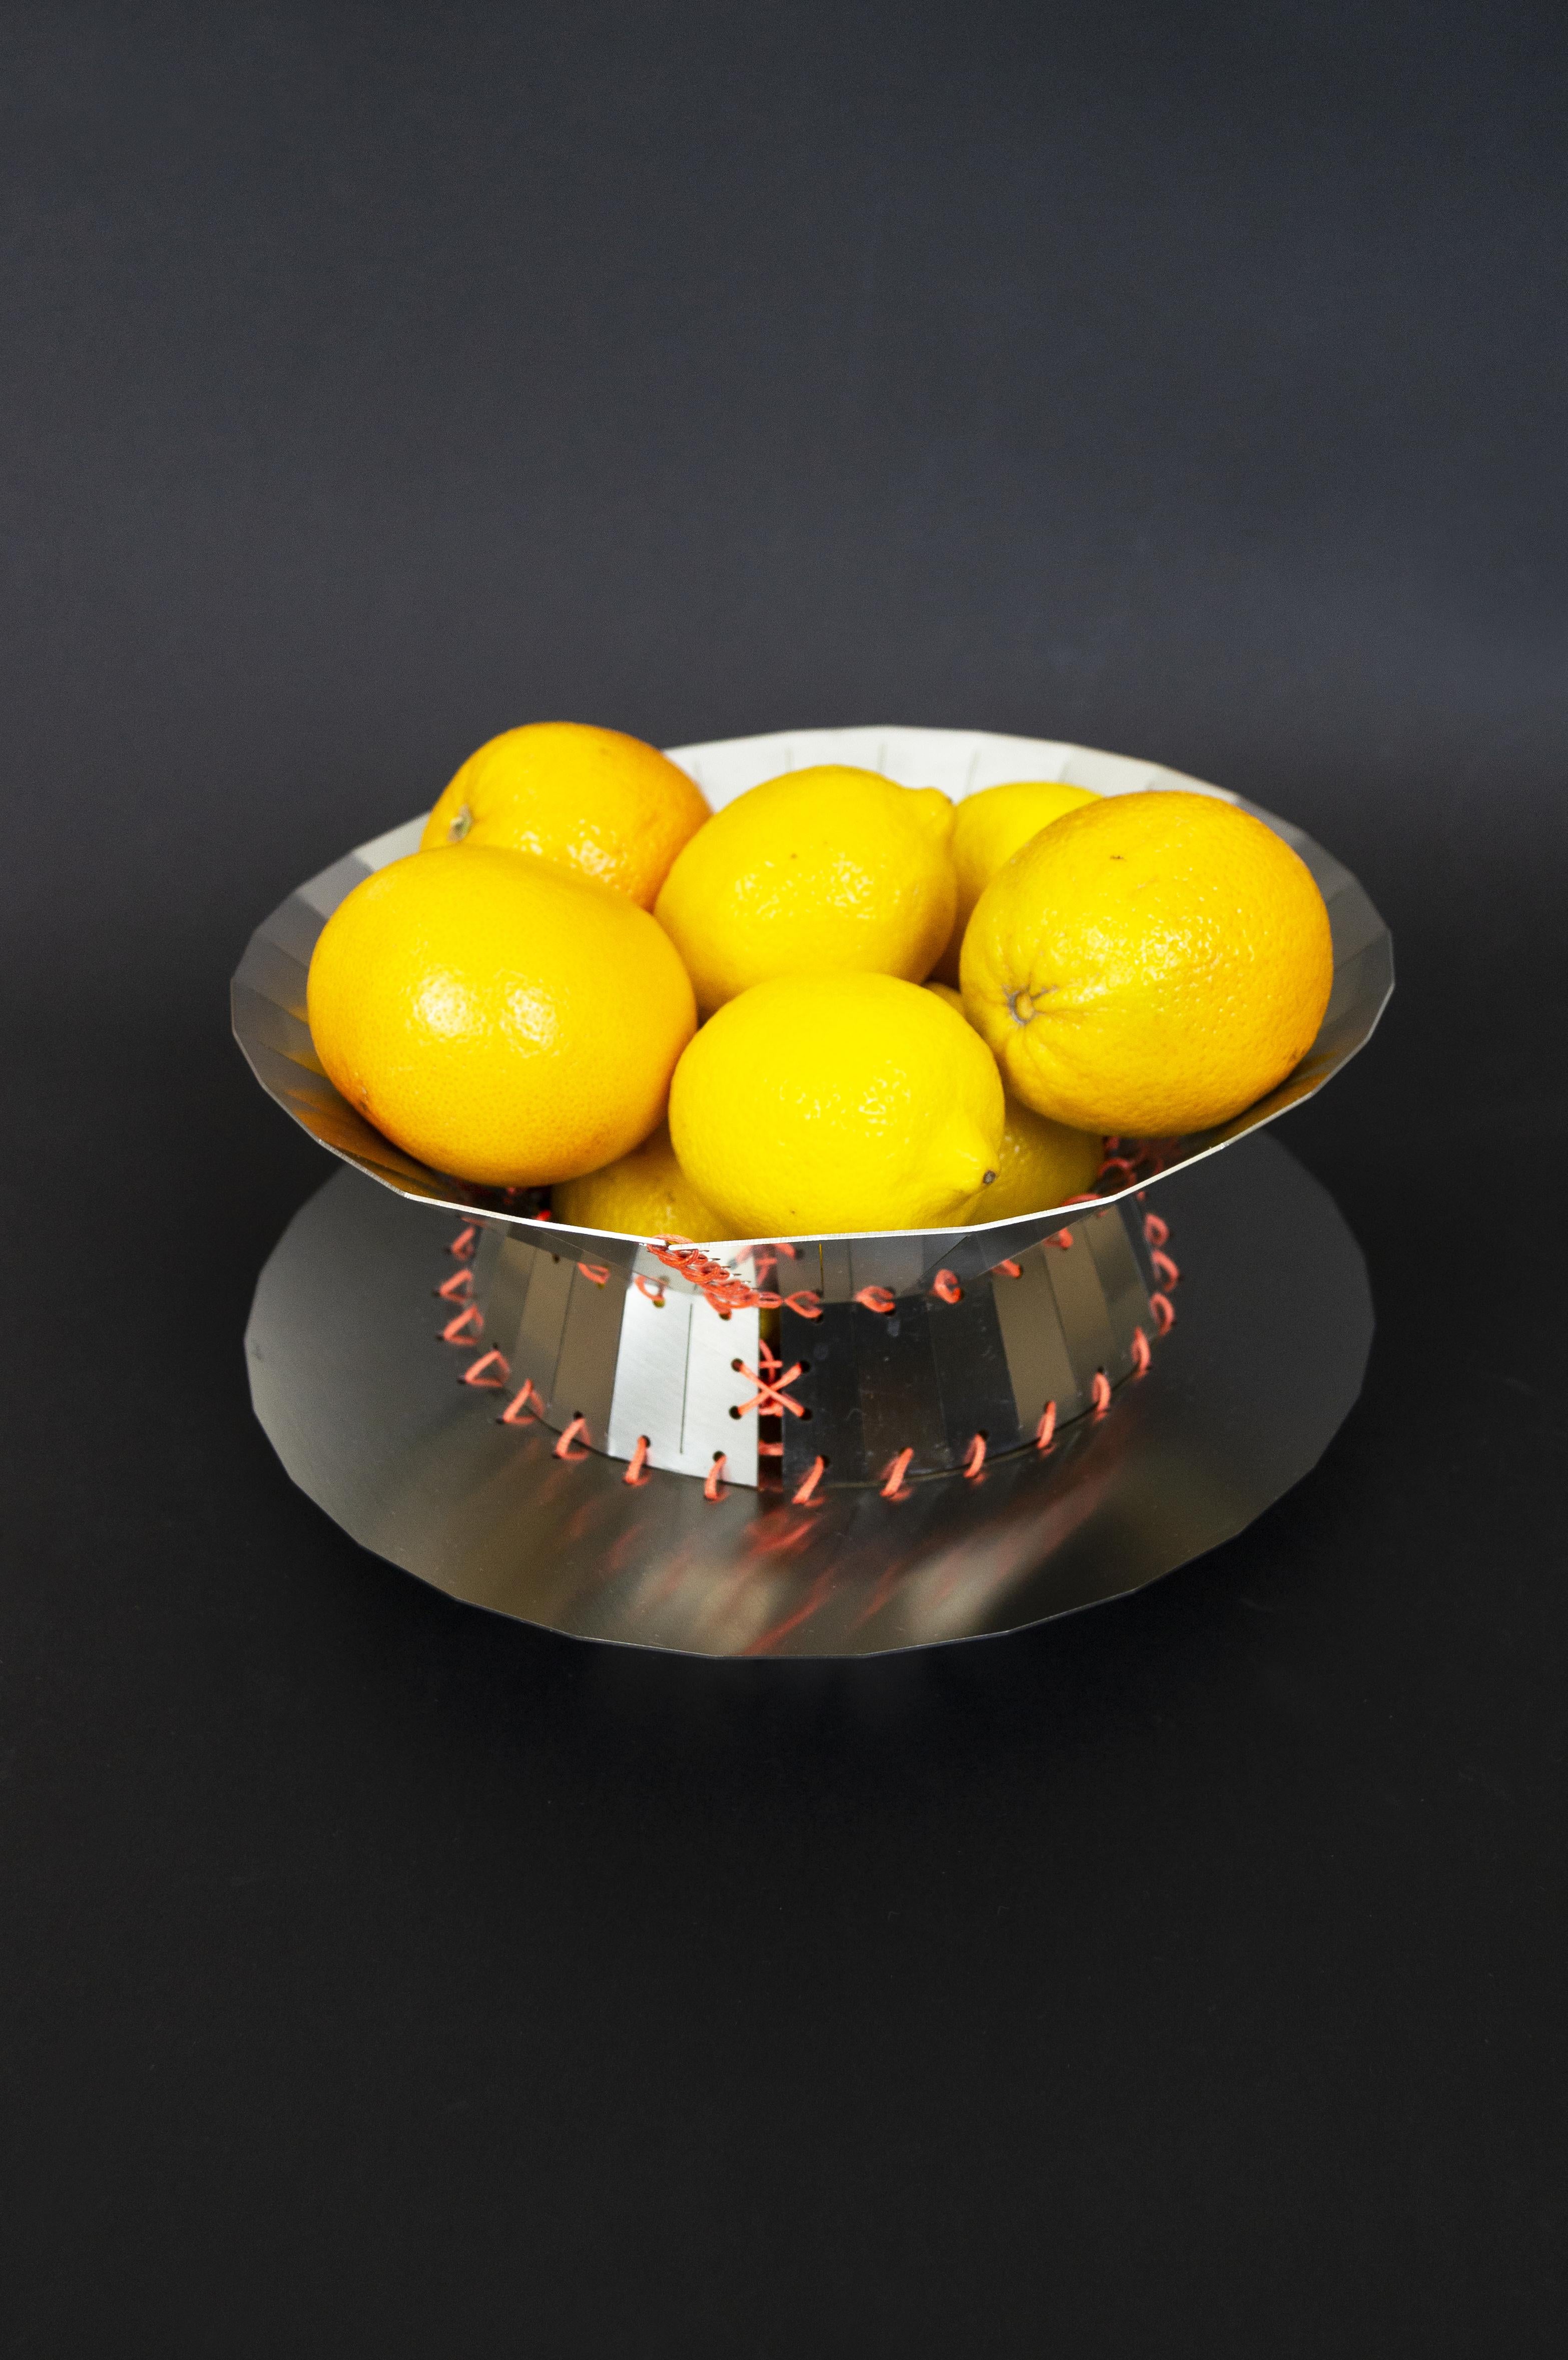 Stainless steel centerpiece from the Minas collection designed by StudioNotte. This tray with clean and multifaceted shapes is assembled with rope stitching. 
Minas whole collection consists of two centerpieces and a tray. These steel sheet